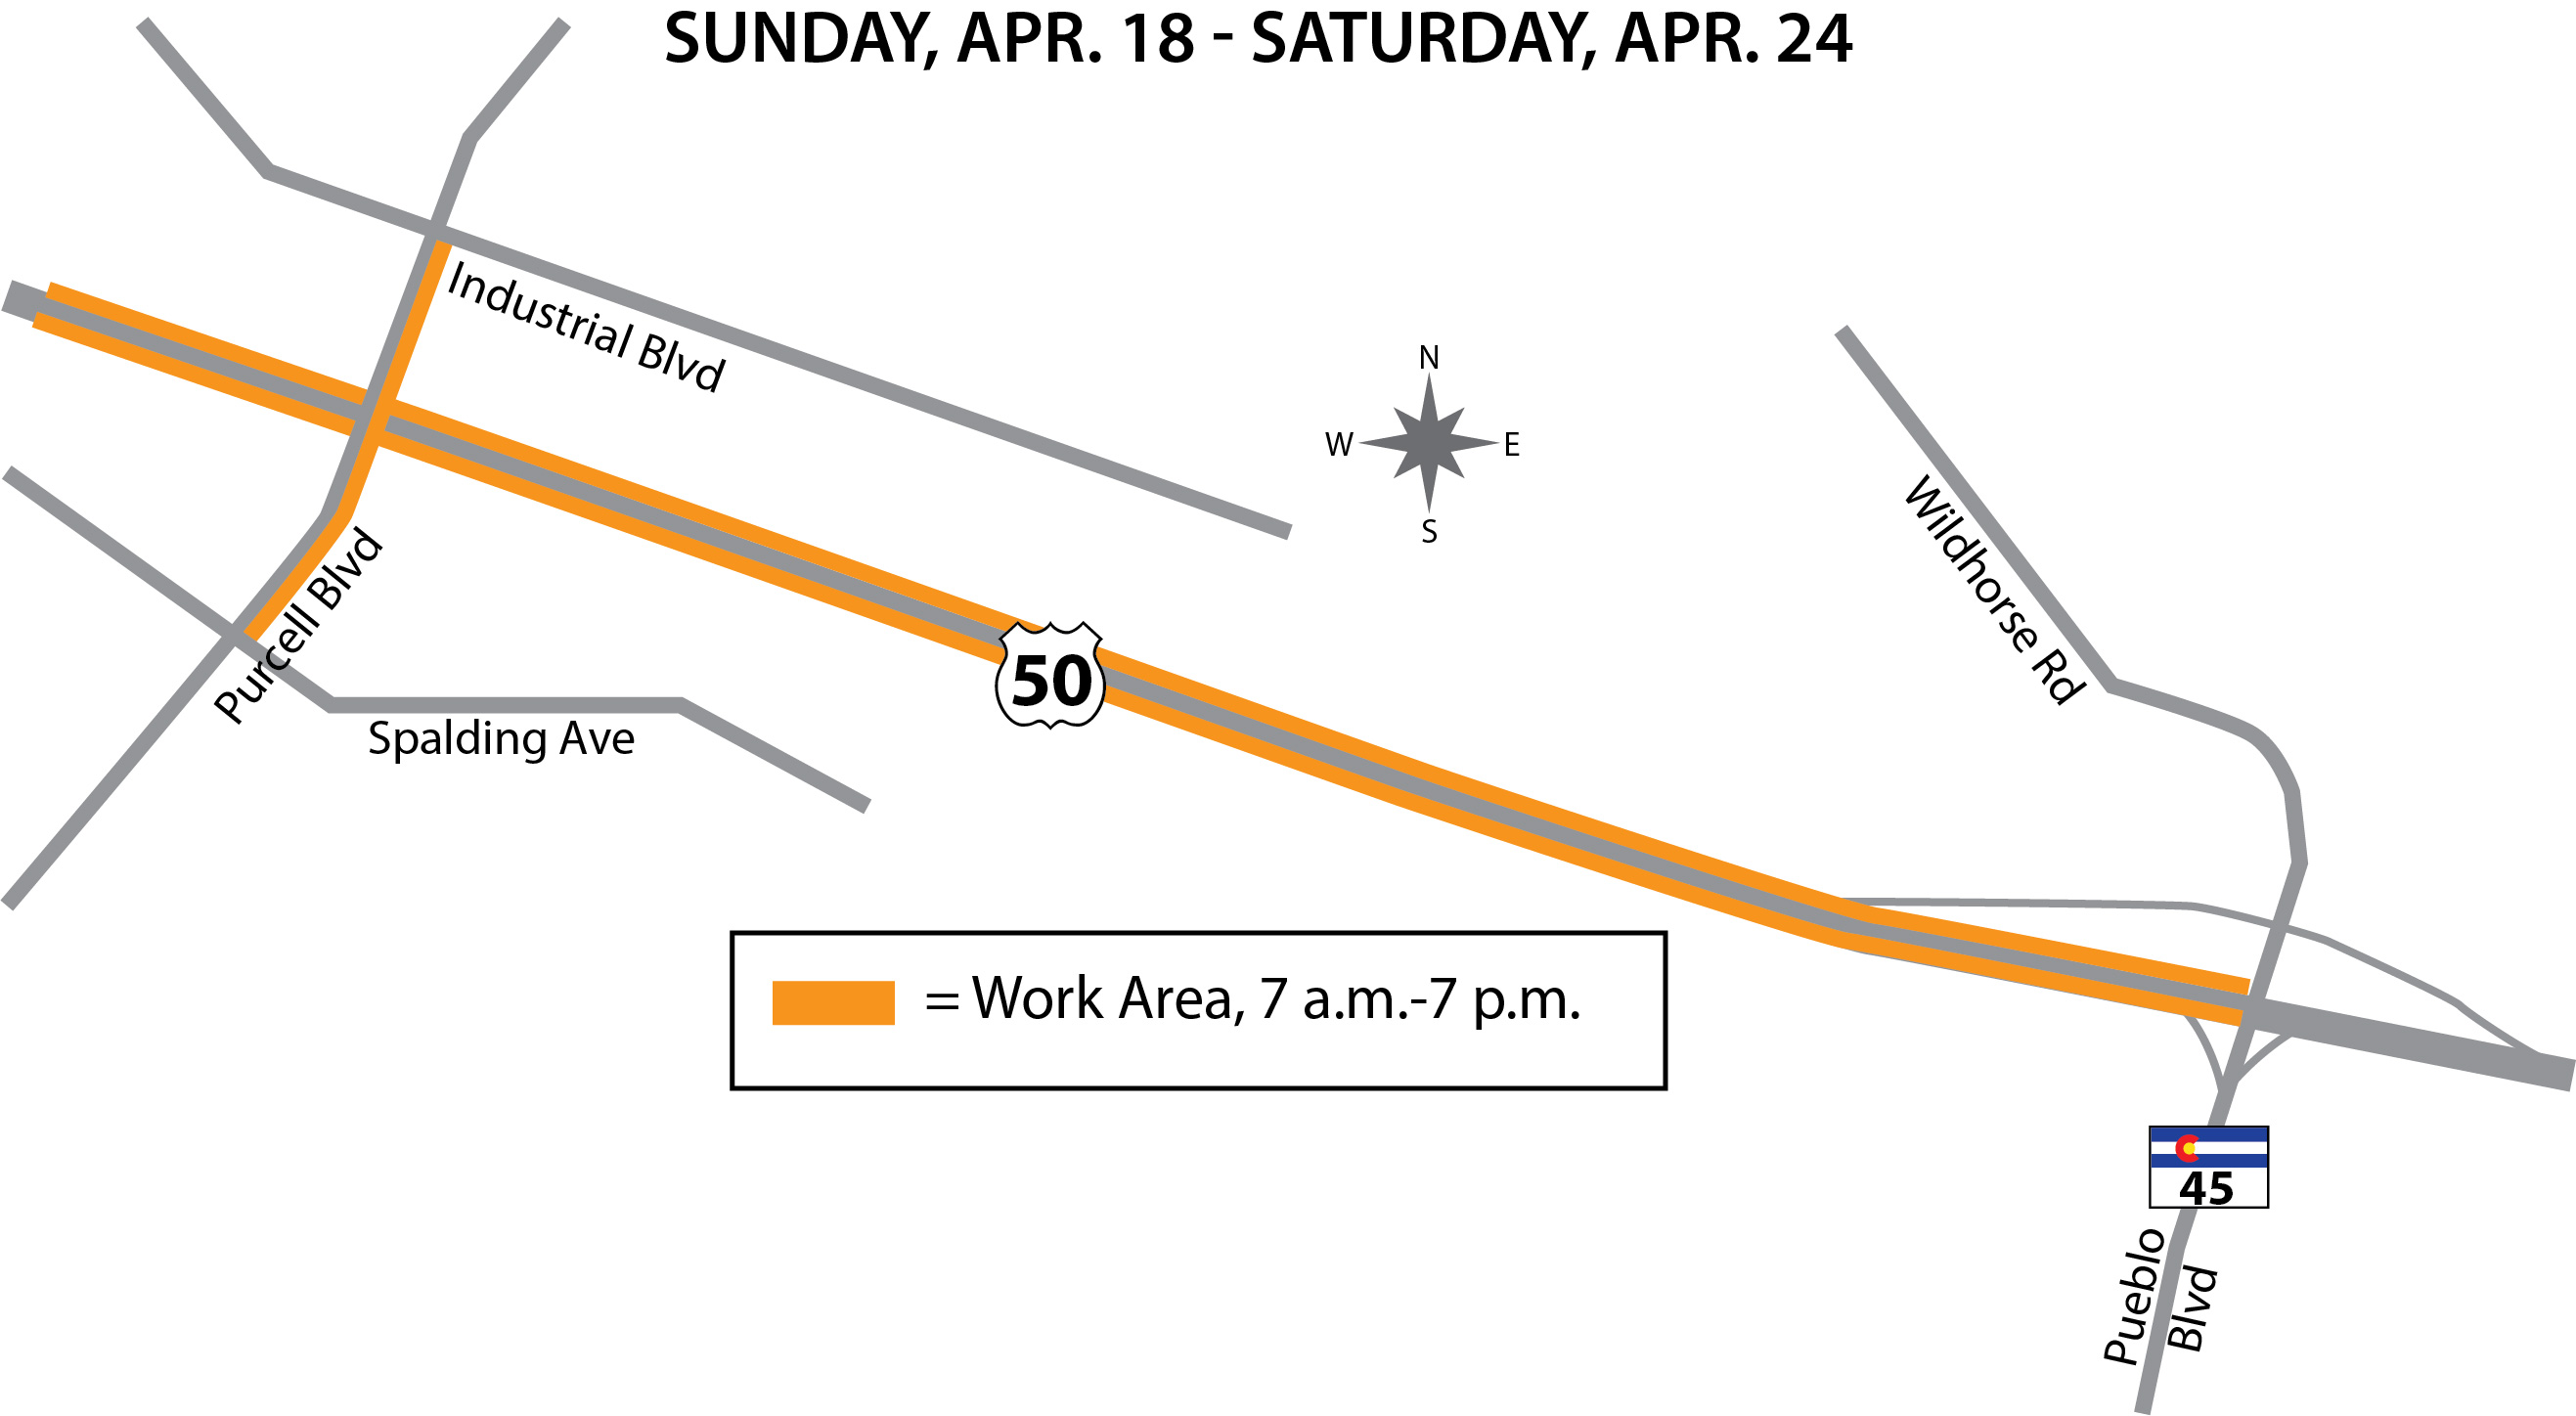 US 50 Purcell map Apr 18.jpg detail image